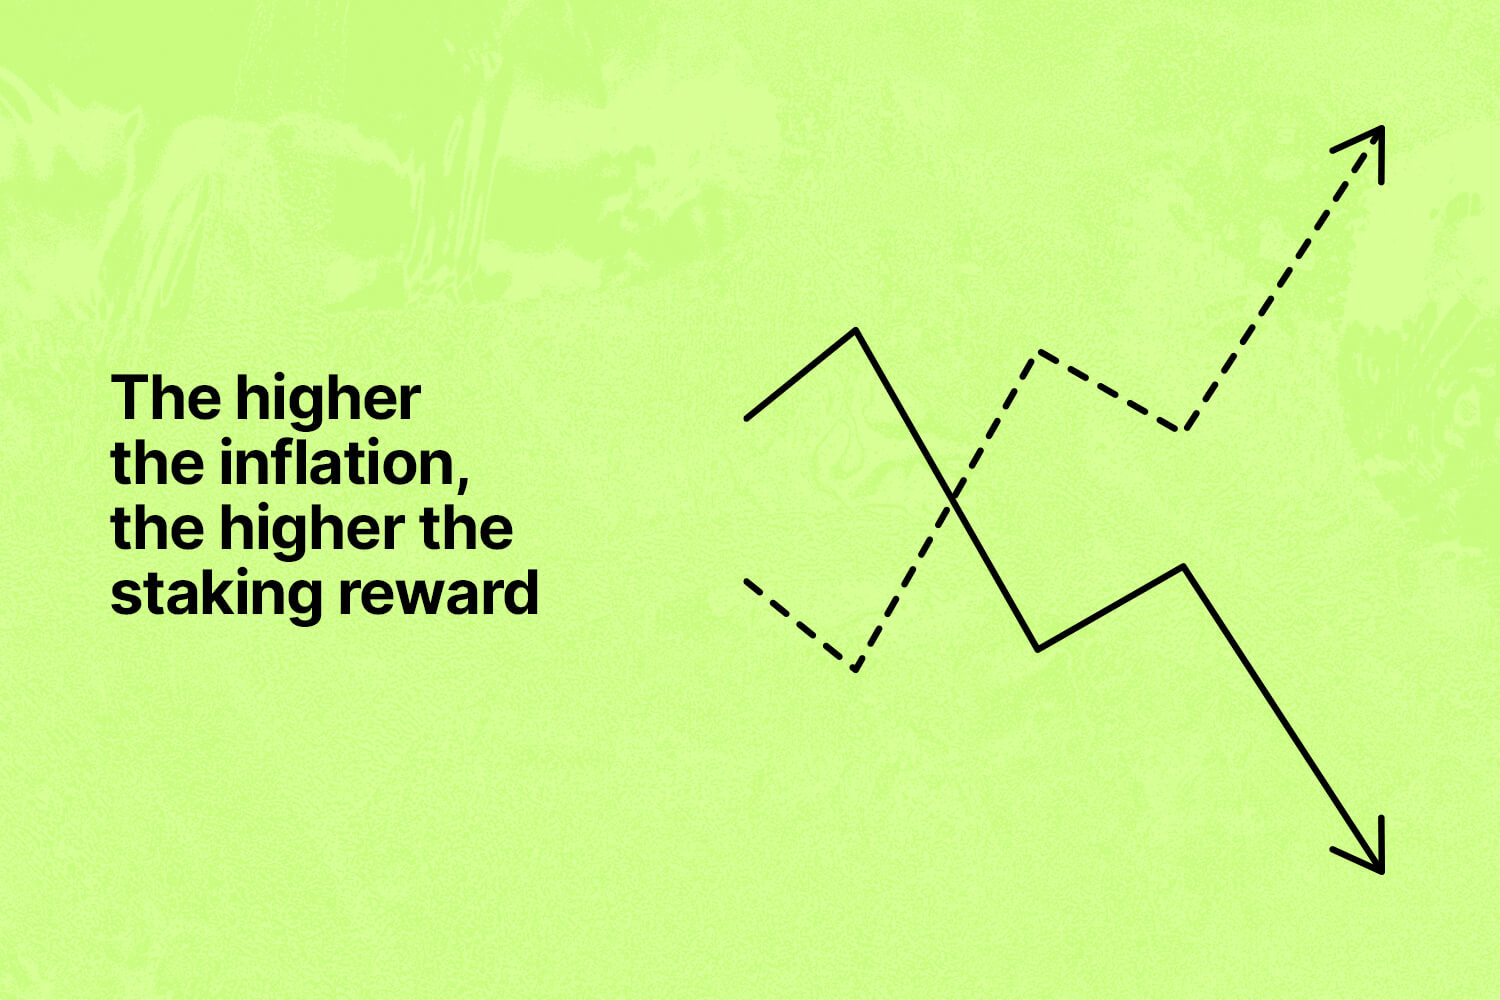 Relationship Between Inflation And Staking Reward